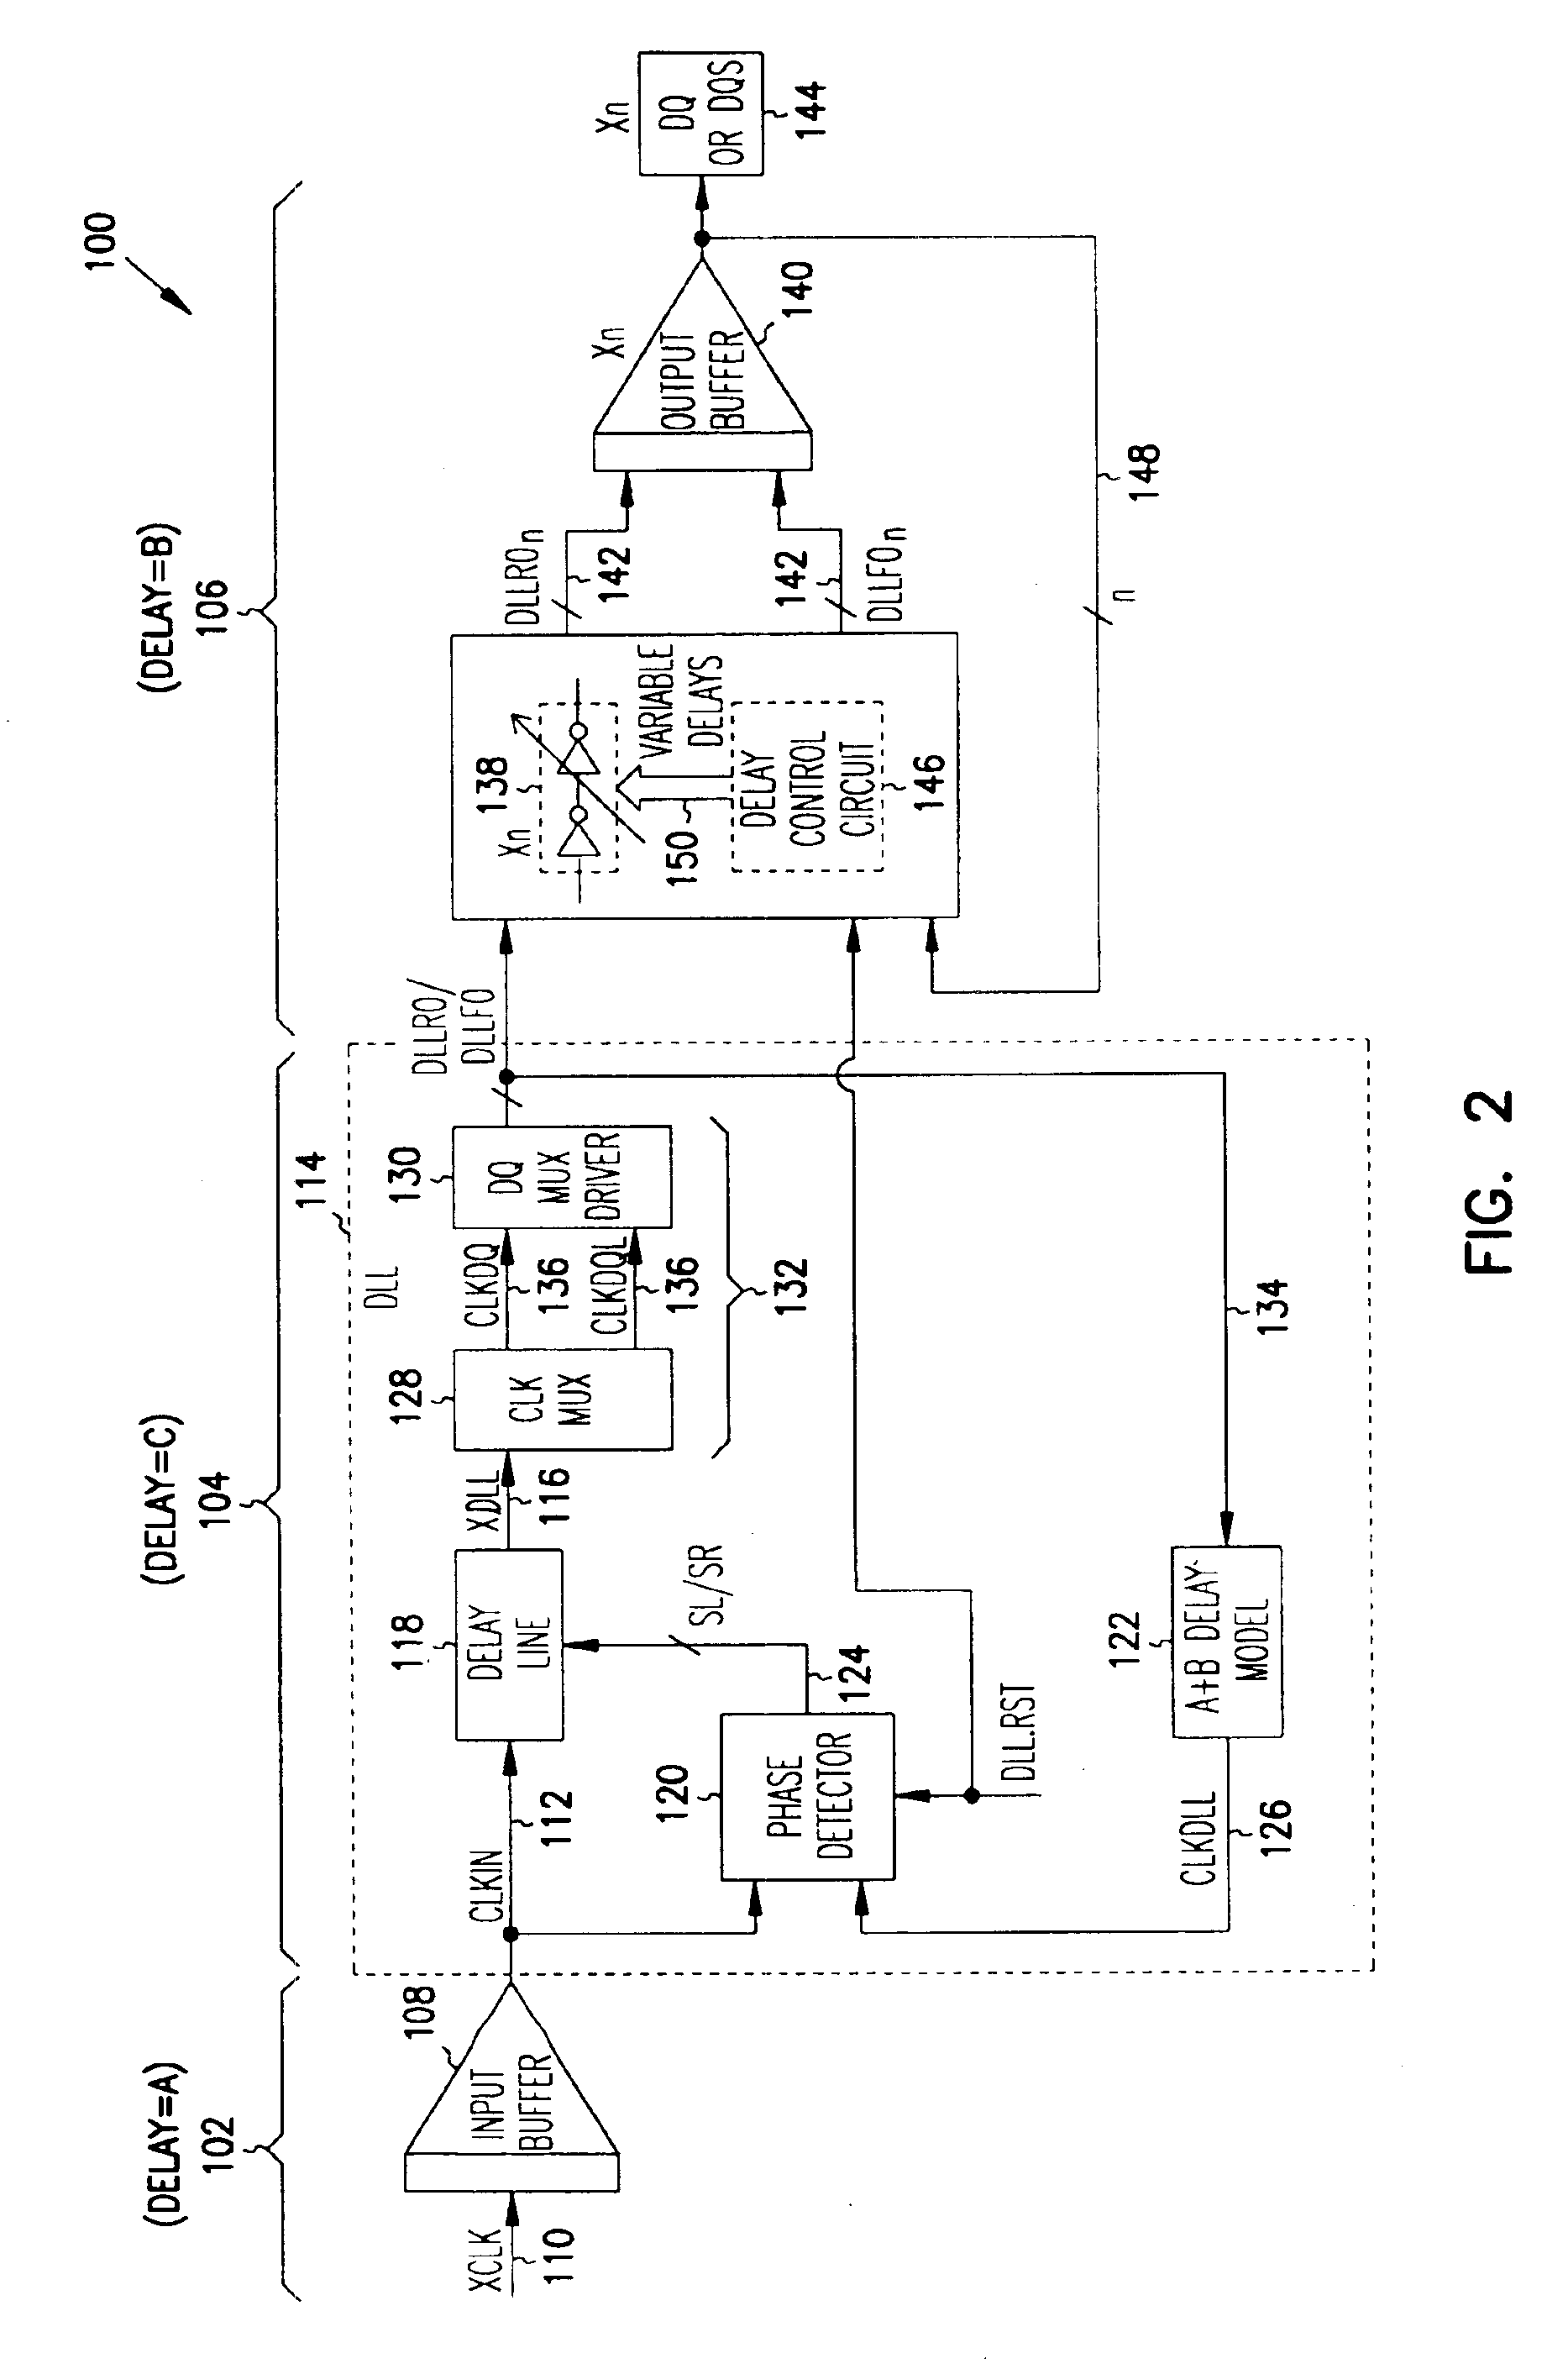 Apparatus for improving output skew for synchronous integrate circuits has delay circuit for generating unique clock signal by applying programmable delay to delayed clock signal